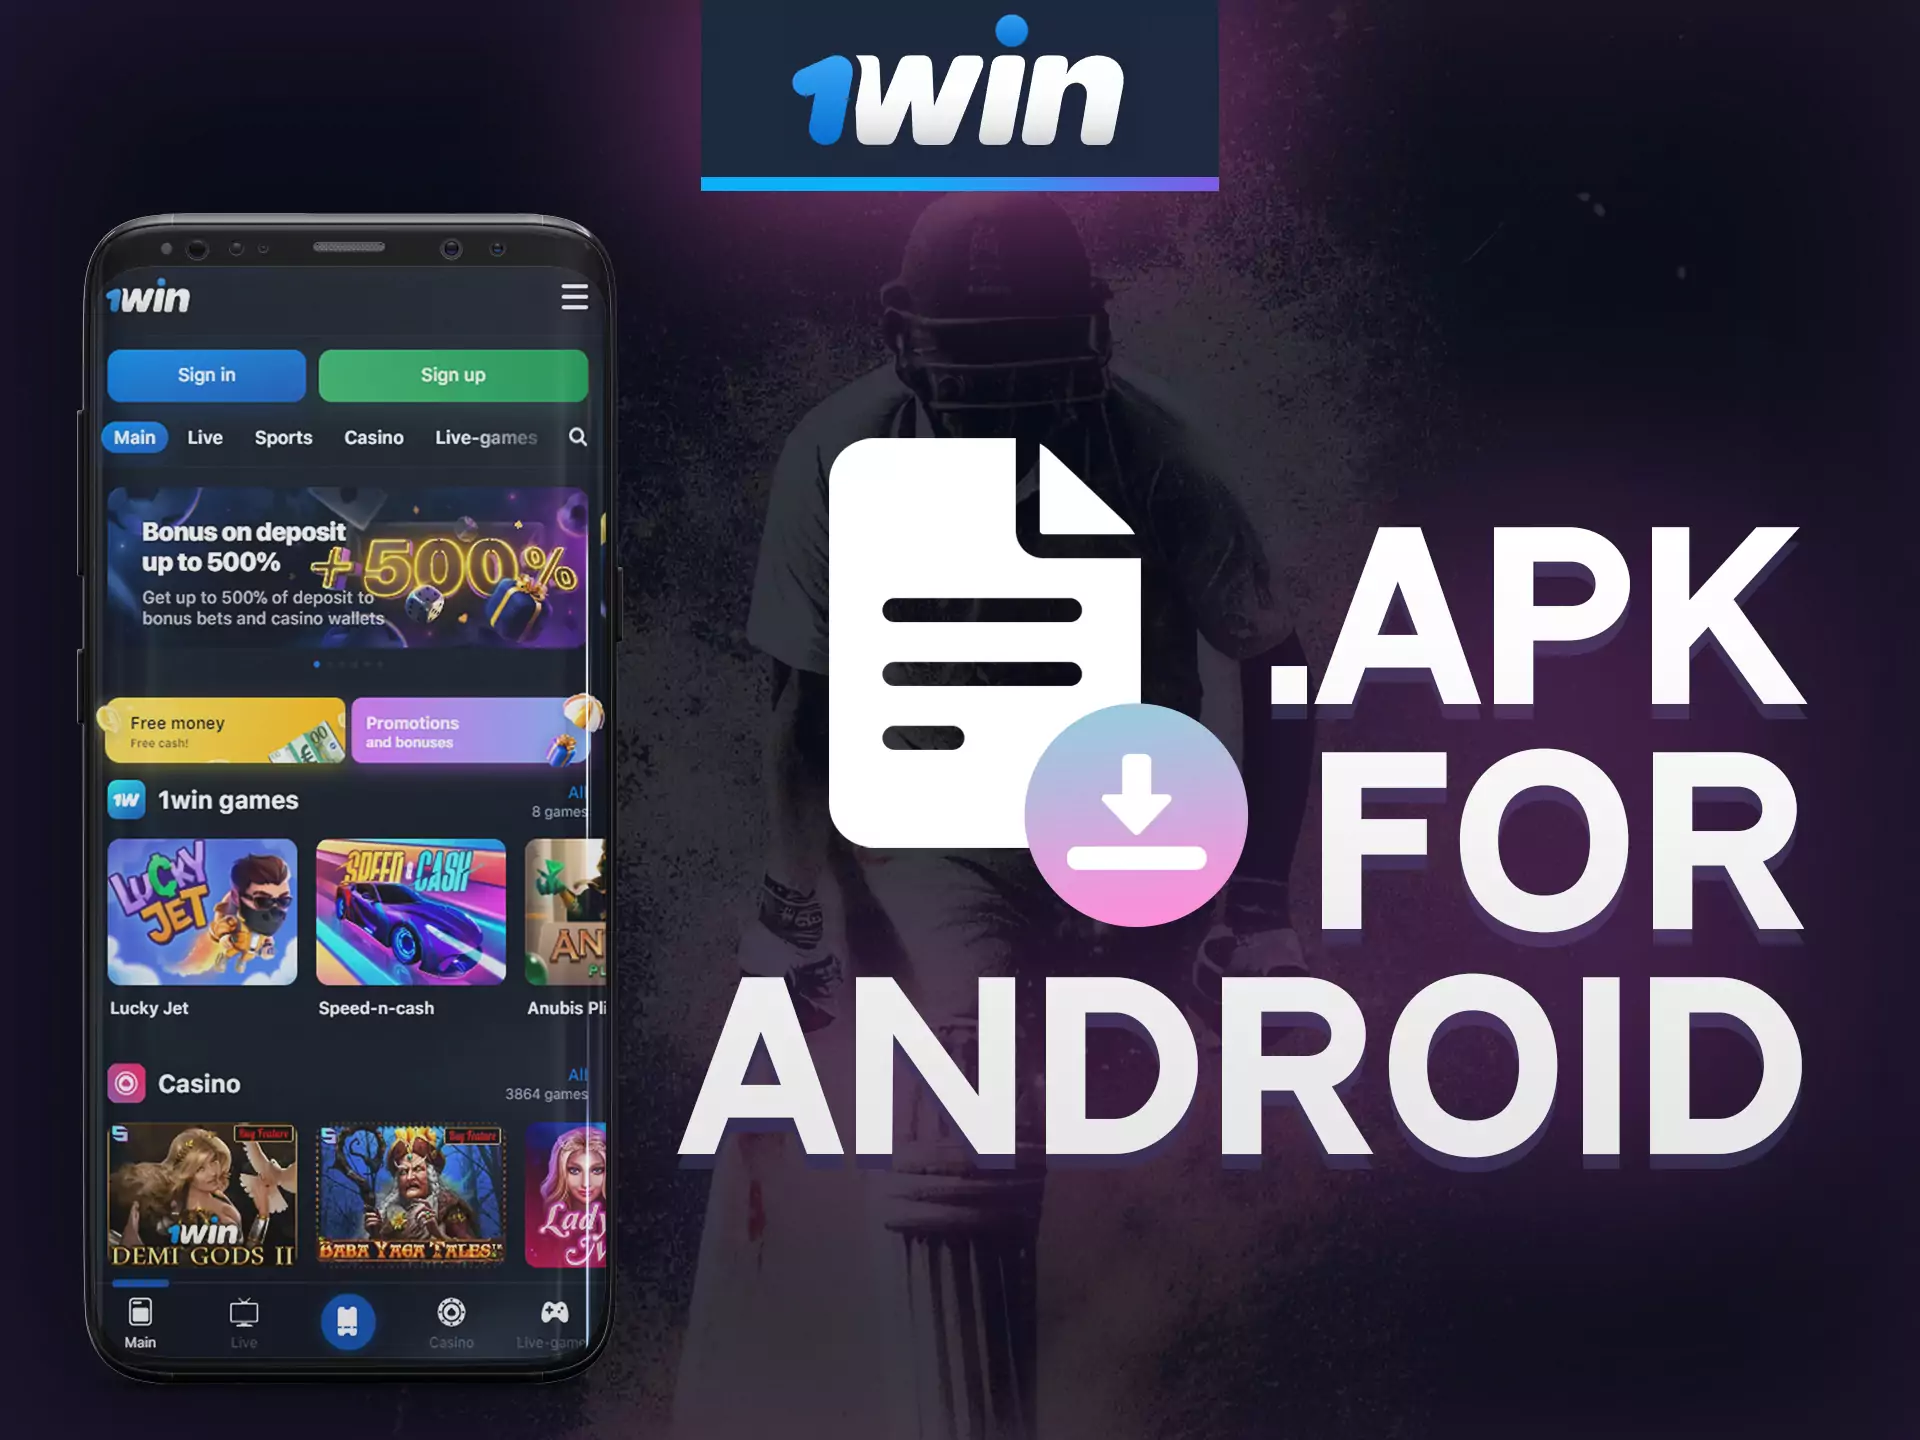 You can istall 1win app on your Android device.